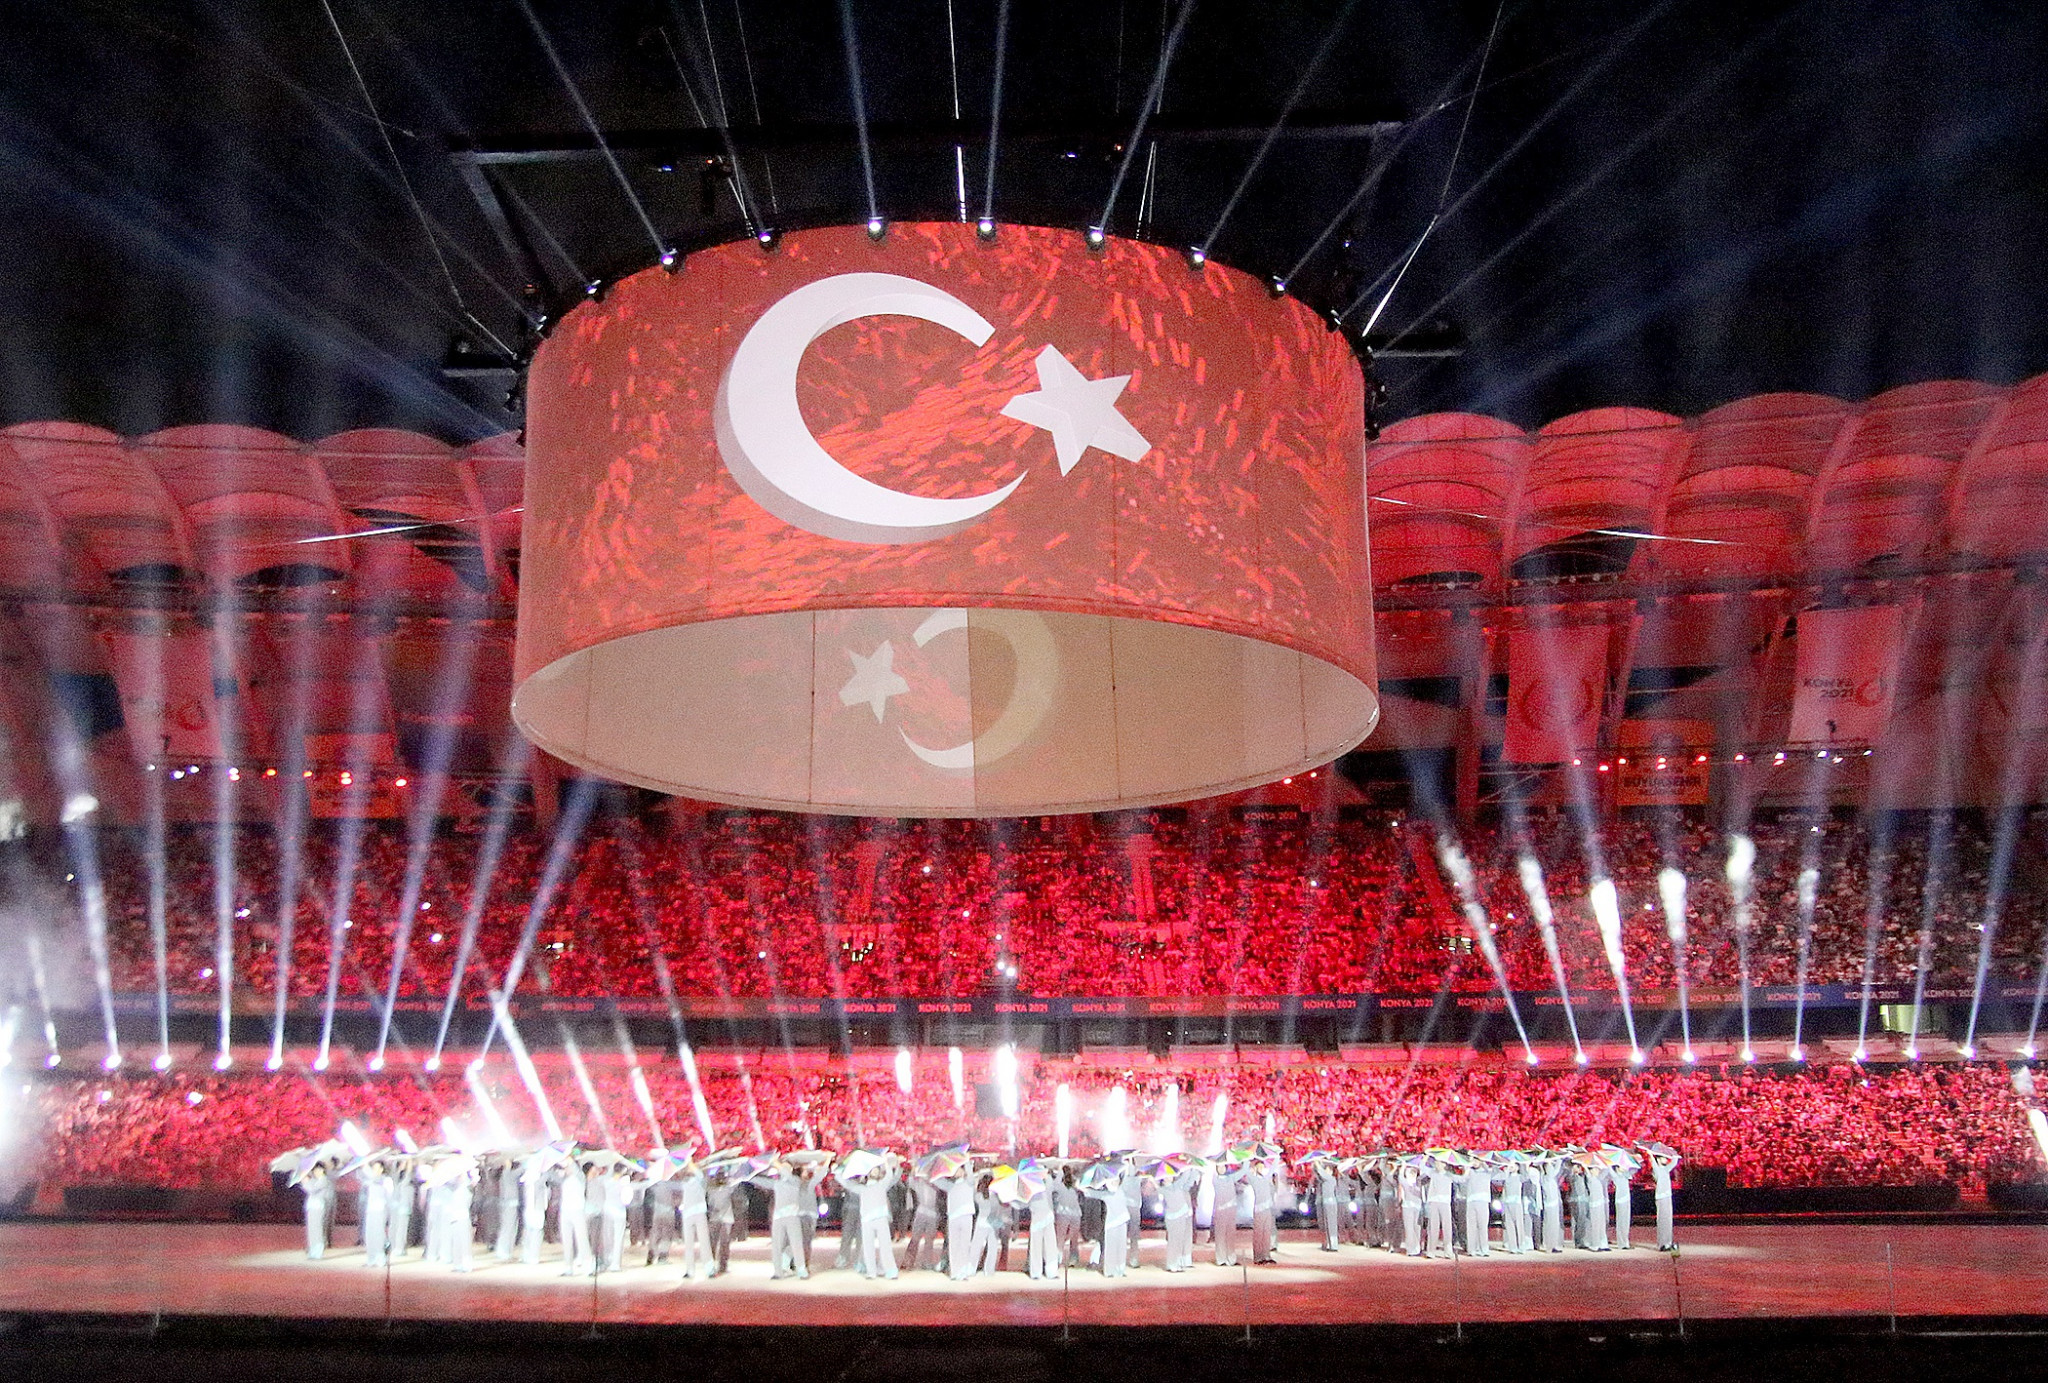 Turkey is aiming to stage the Olympics for the first time ©Konya 2021